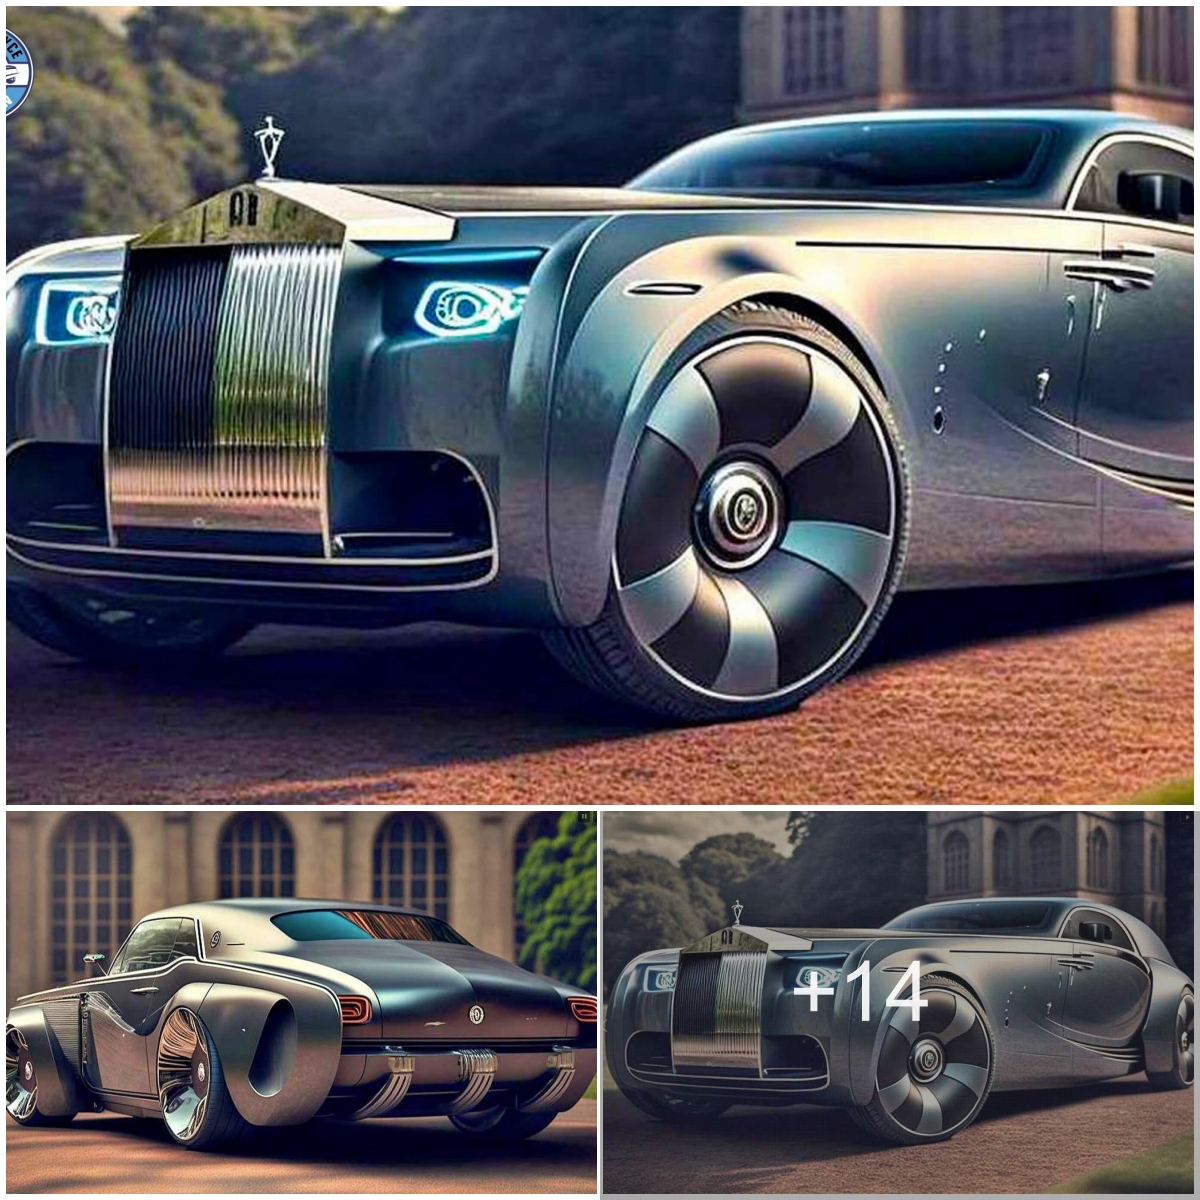 The 2030 Autolux Specter: An Extravagant Vision of a Future Rolls-Royce